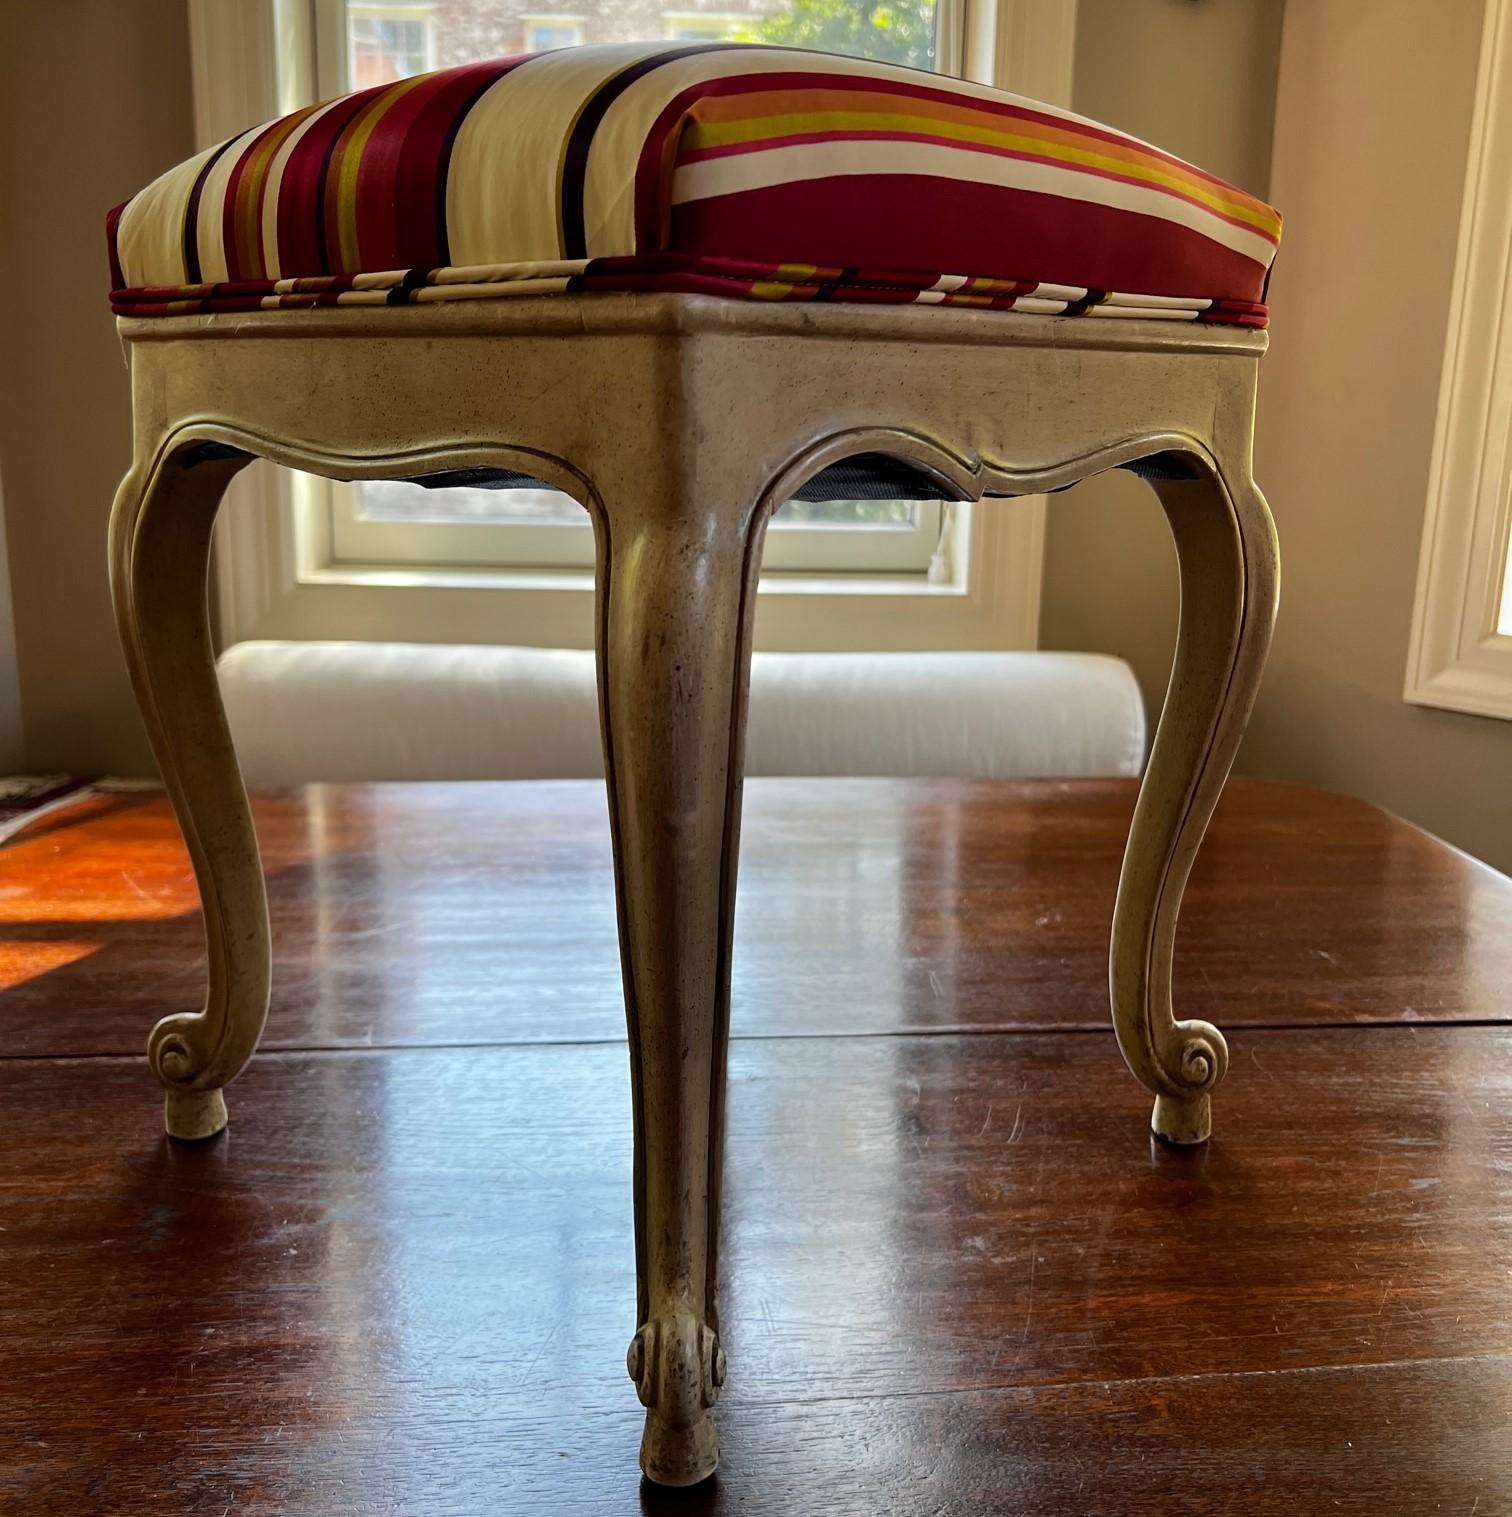 Hand-Crafted Vintage Thomas De Angelis Stool in Manuel Canovas Silk Stripe Fabric For Sale